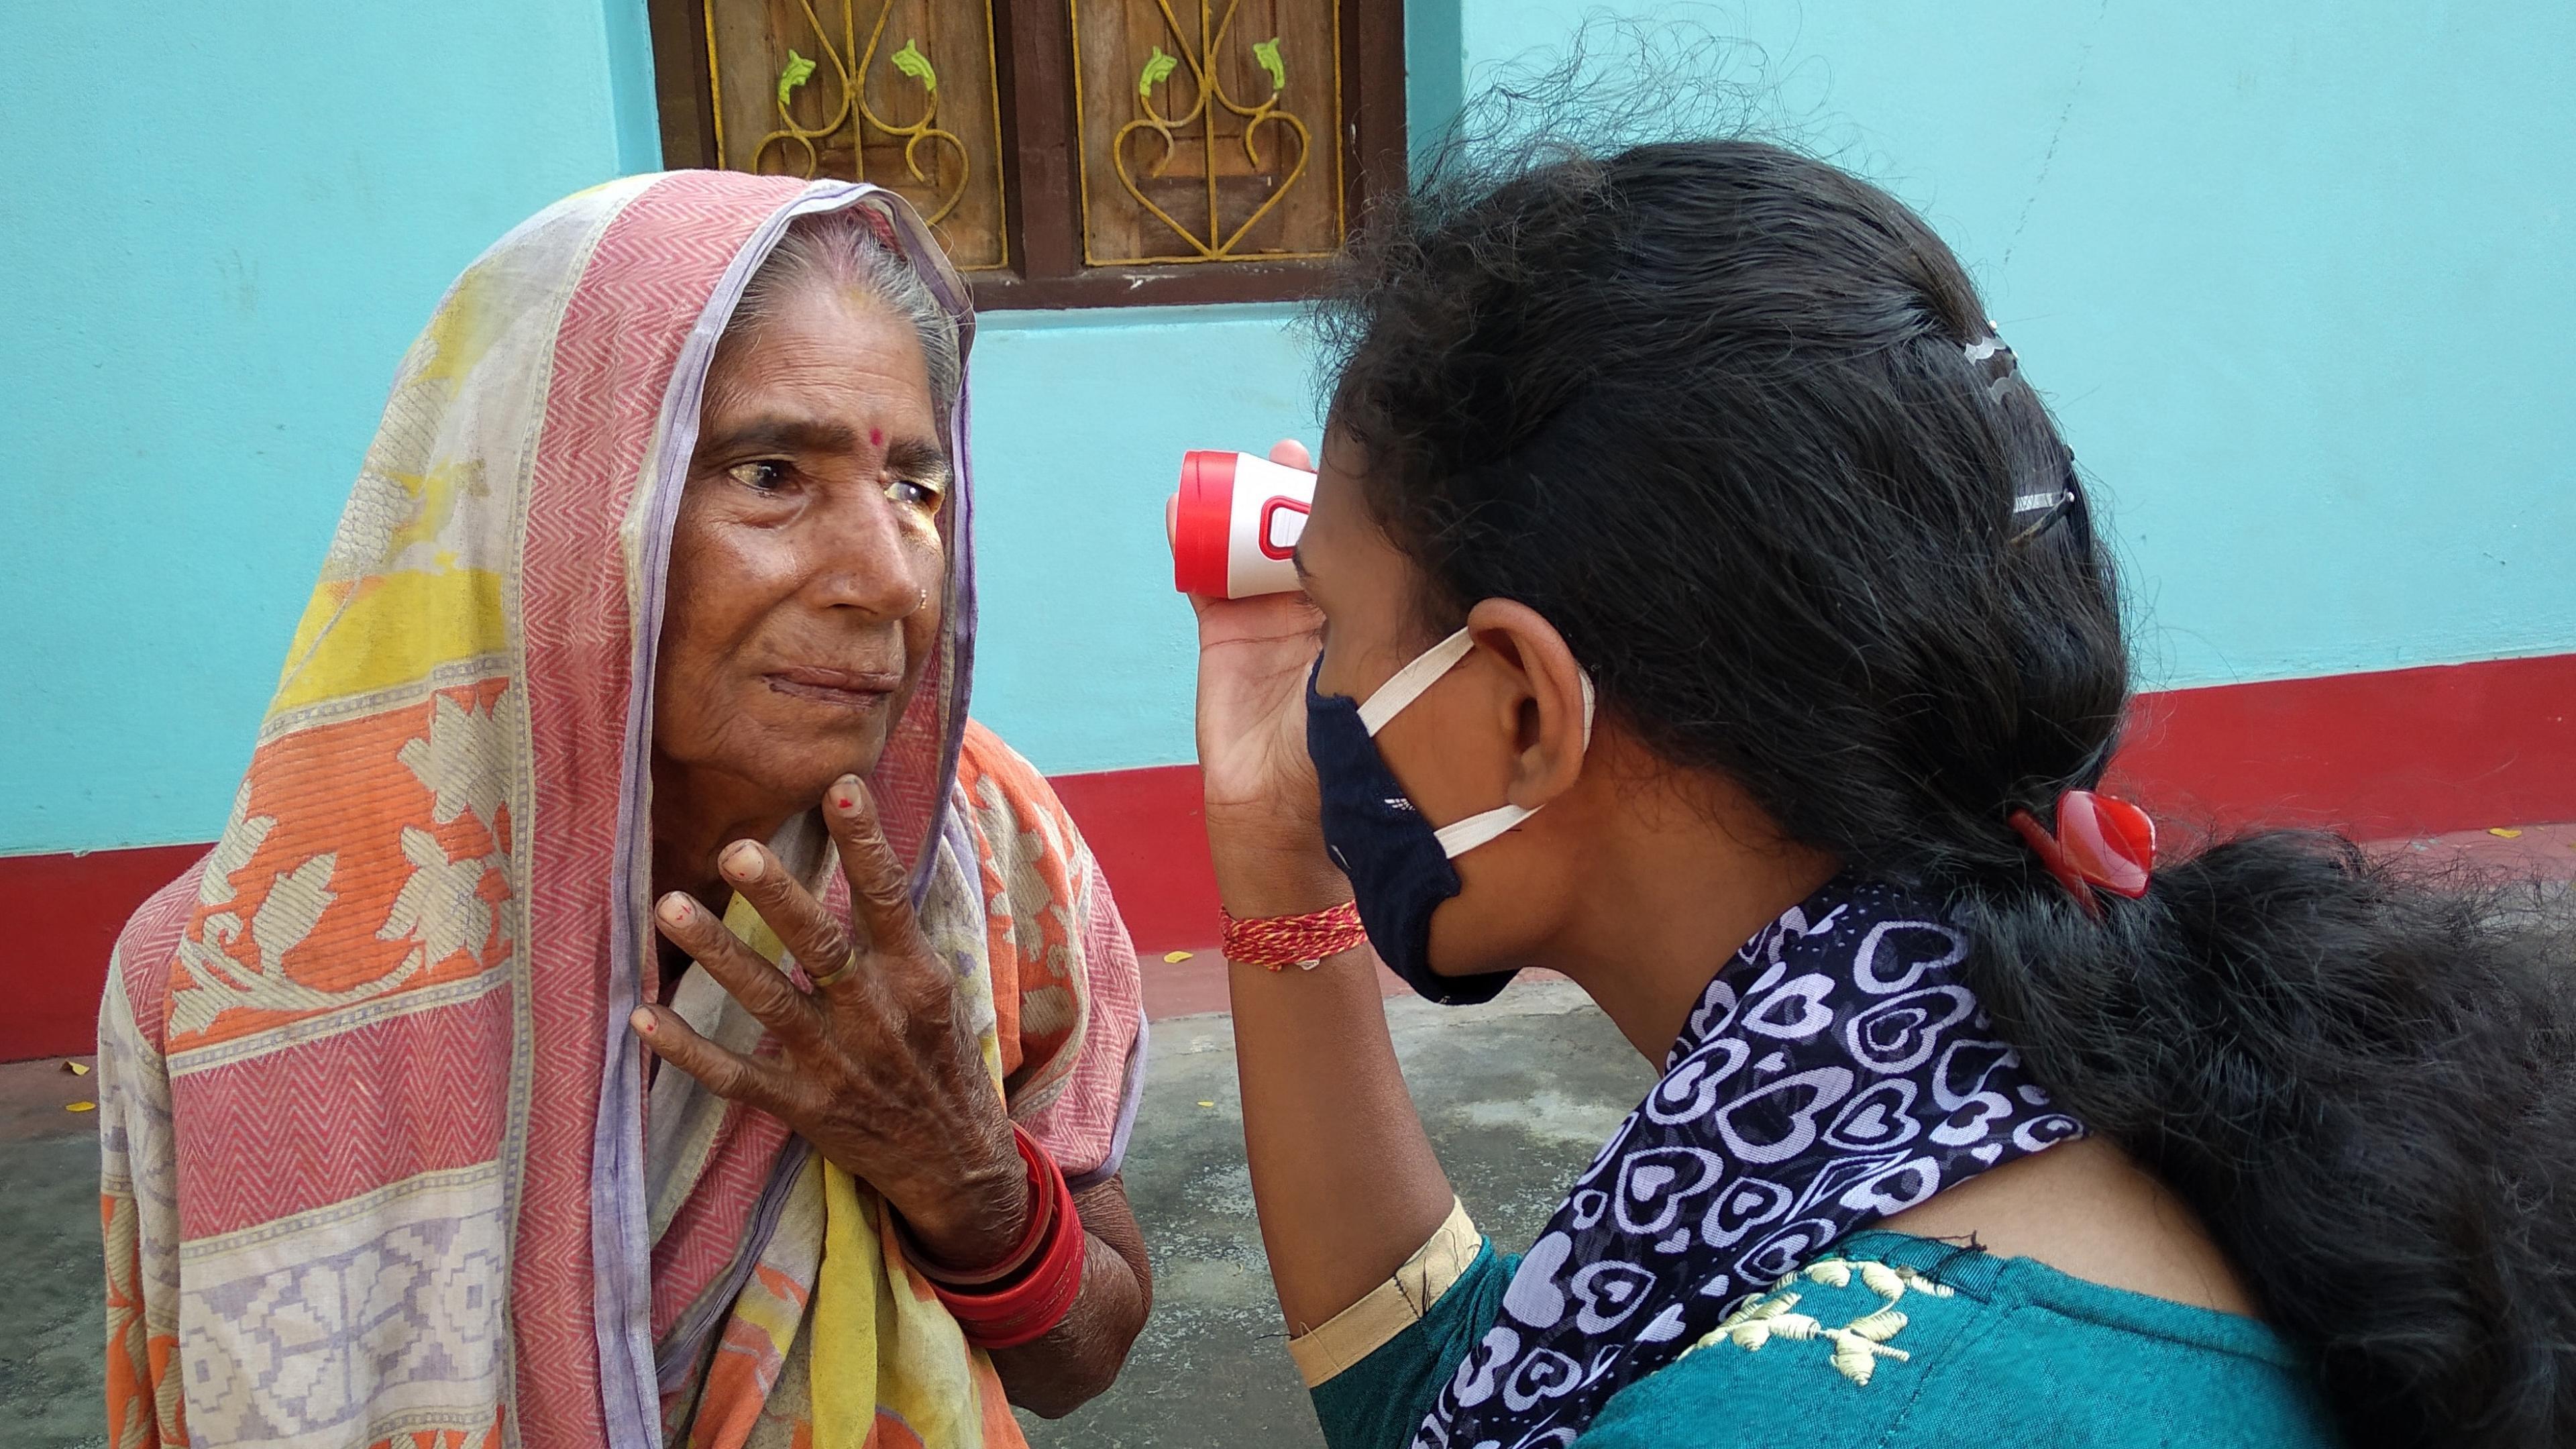 Indian woman gets an eye exam with a flashlight